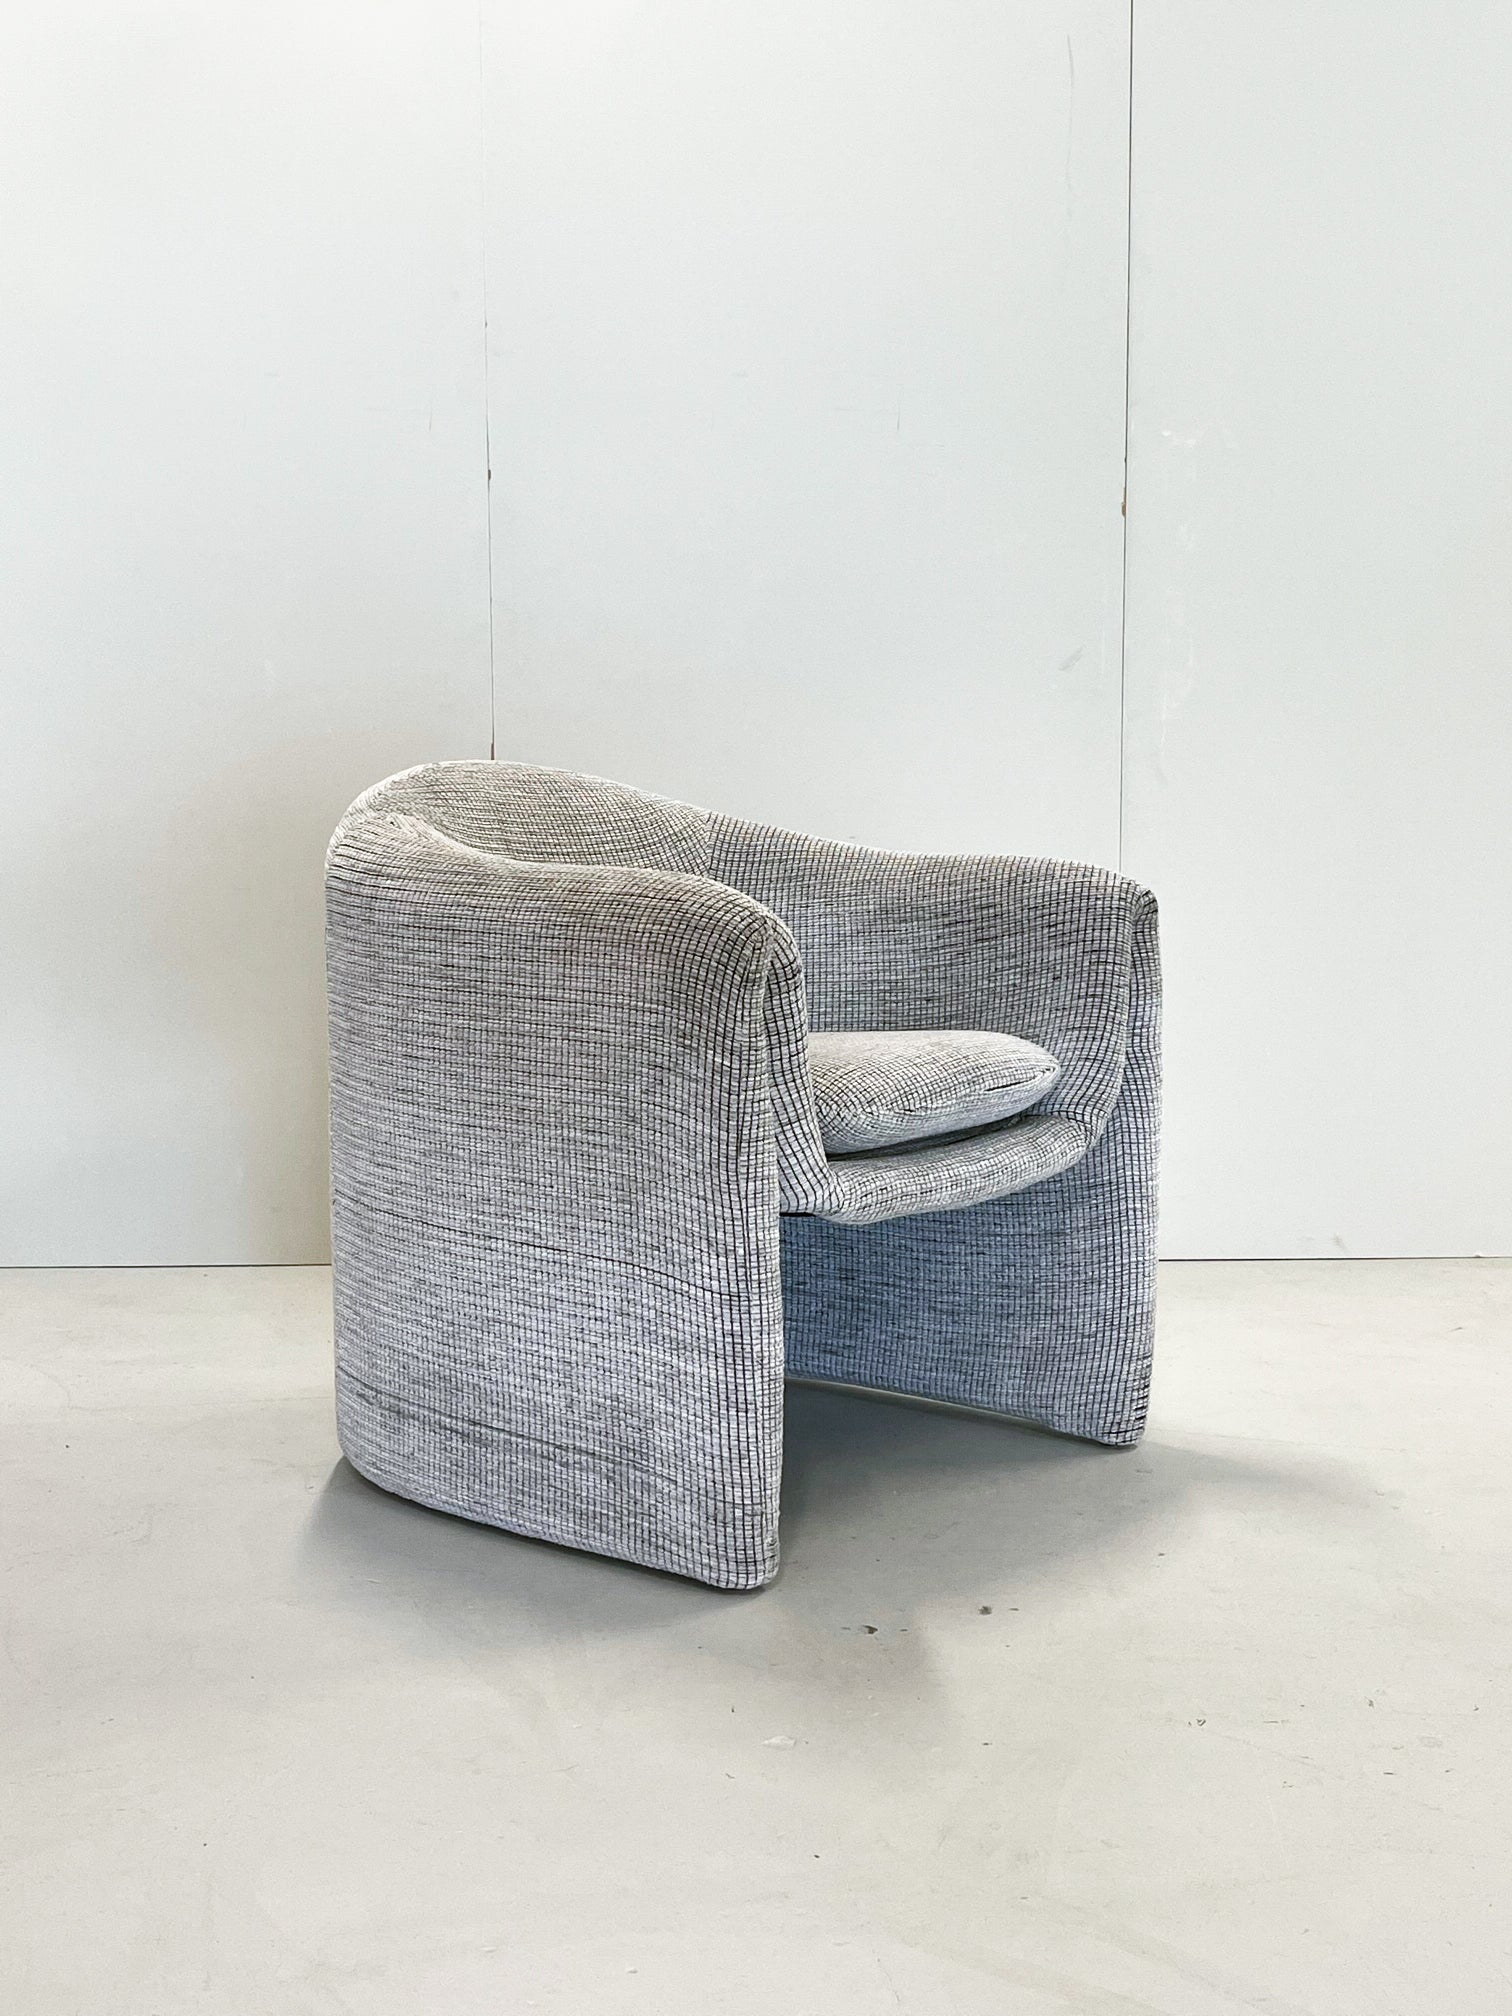 Freeform Armchair by Vladimir Kagan for Preview